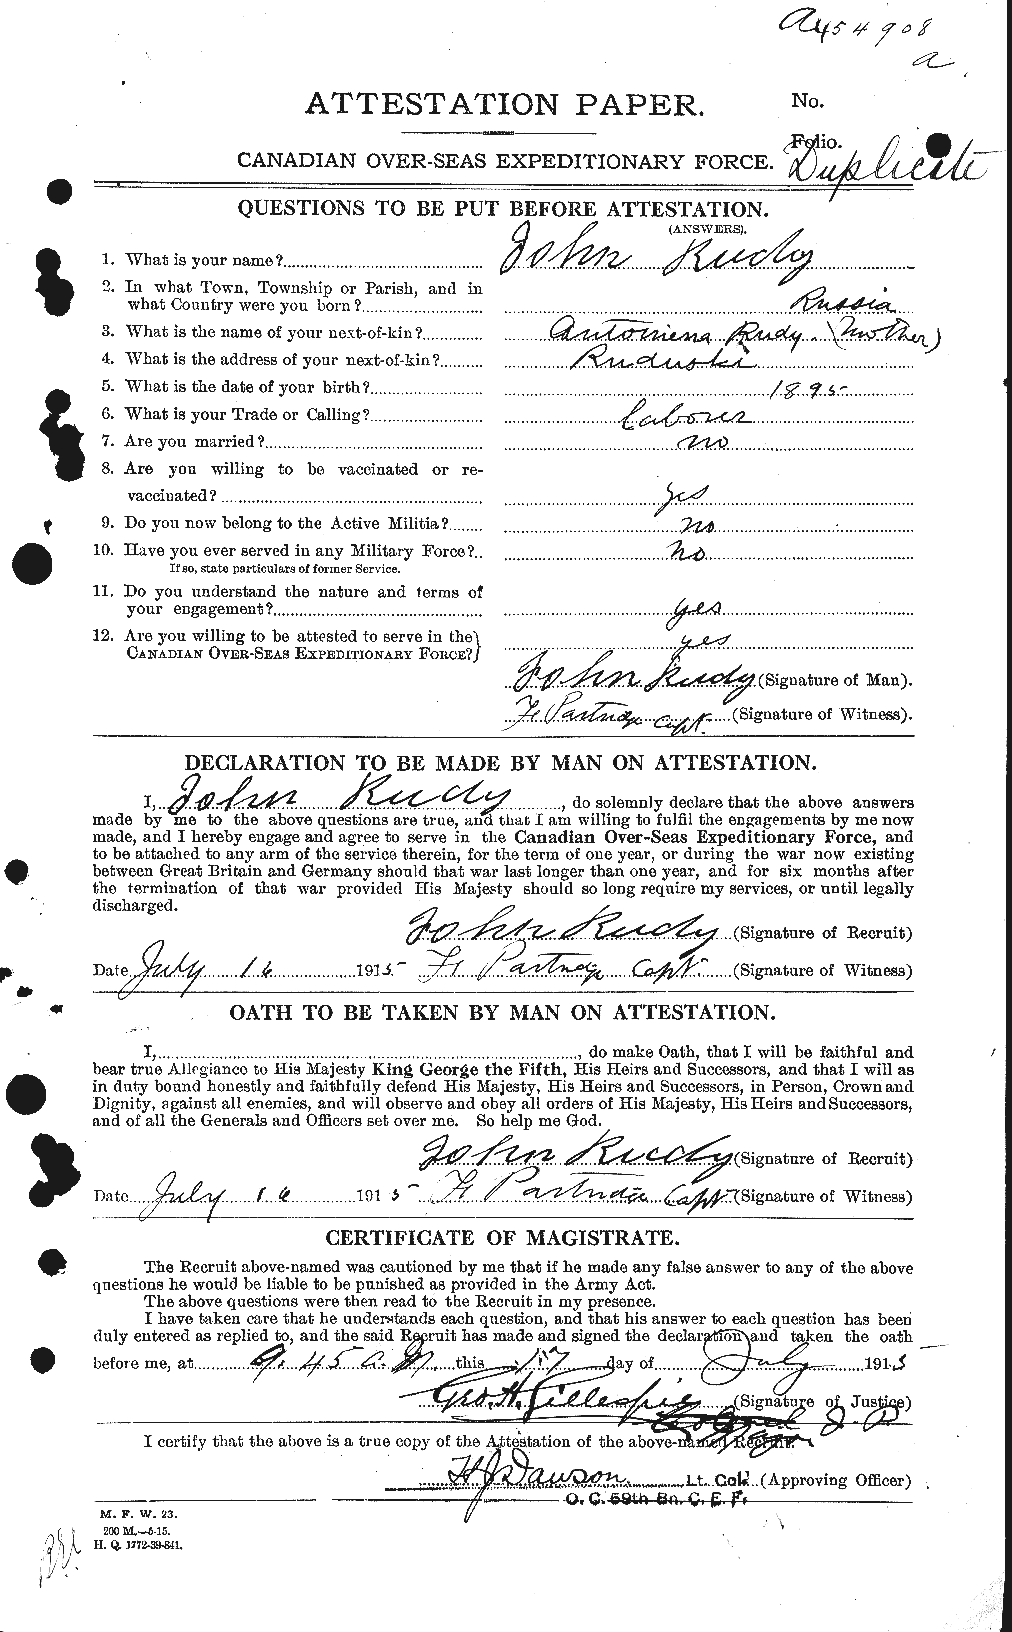 Personnel Records of the First World War - CEF 617159a